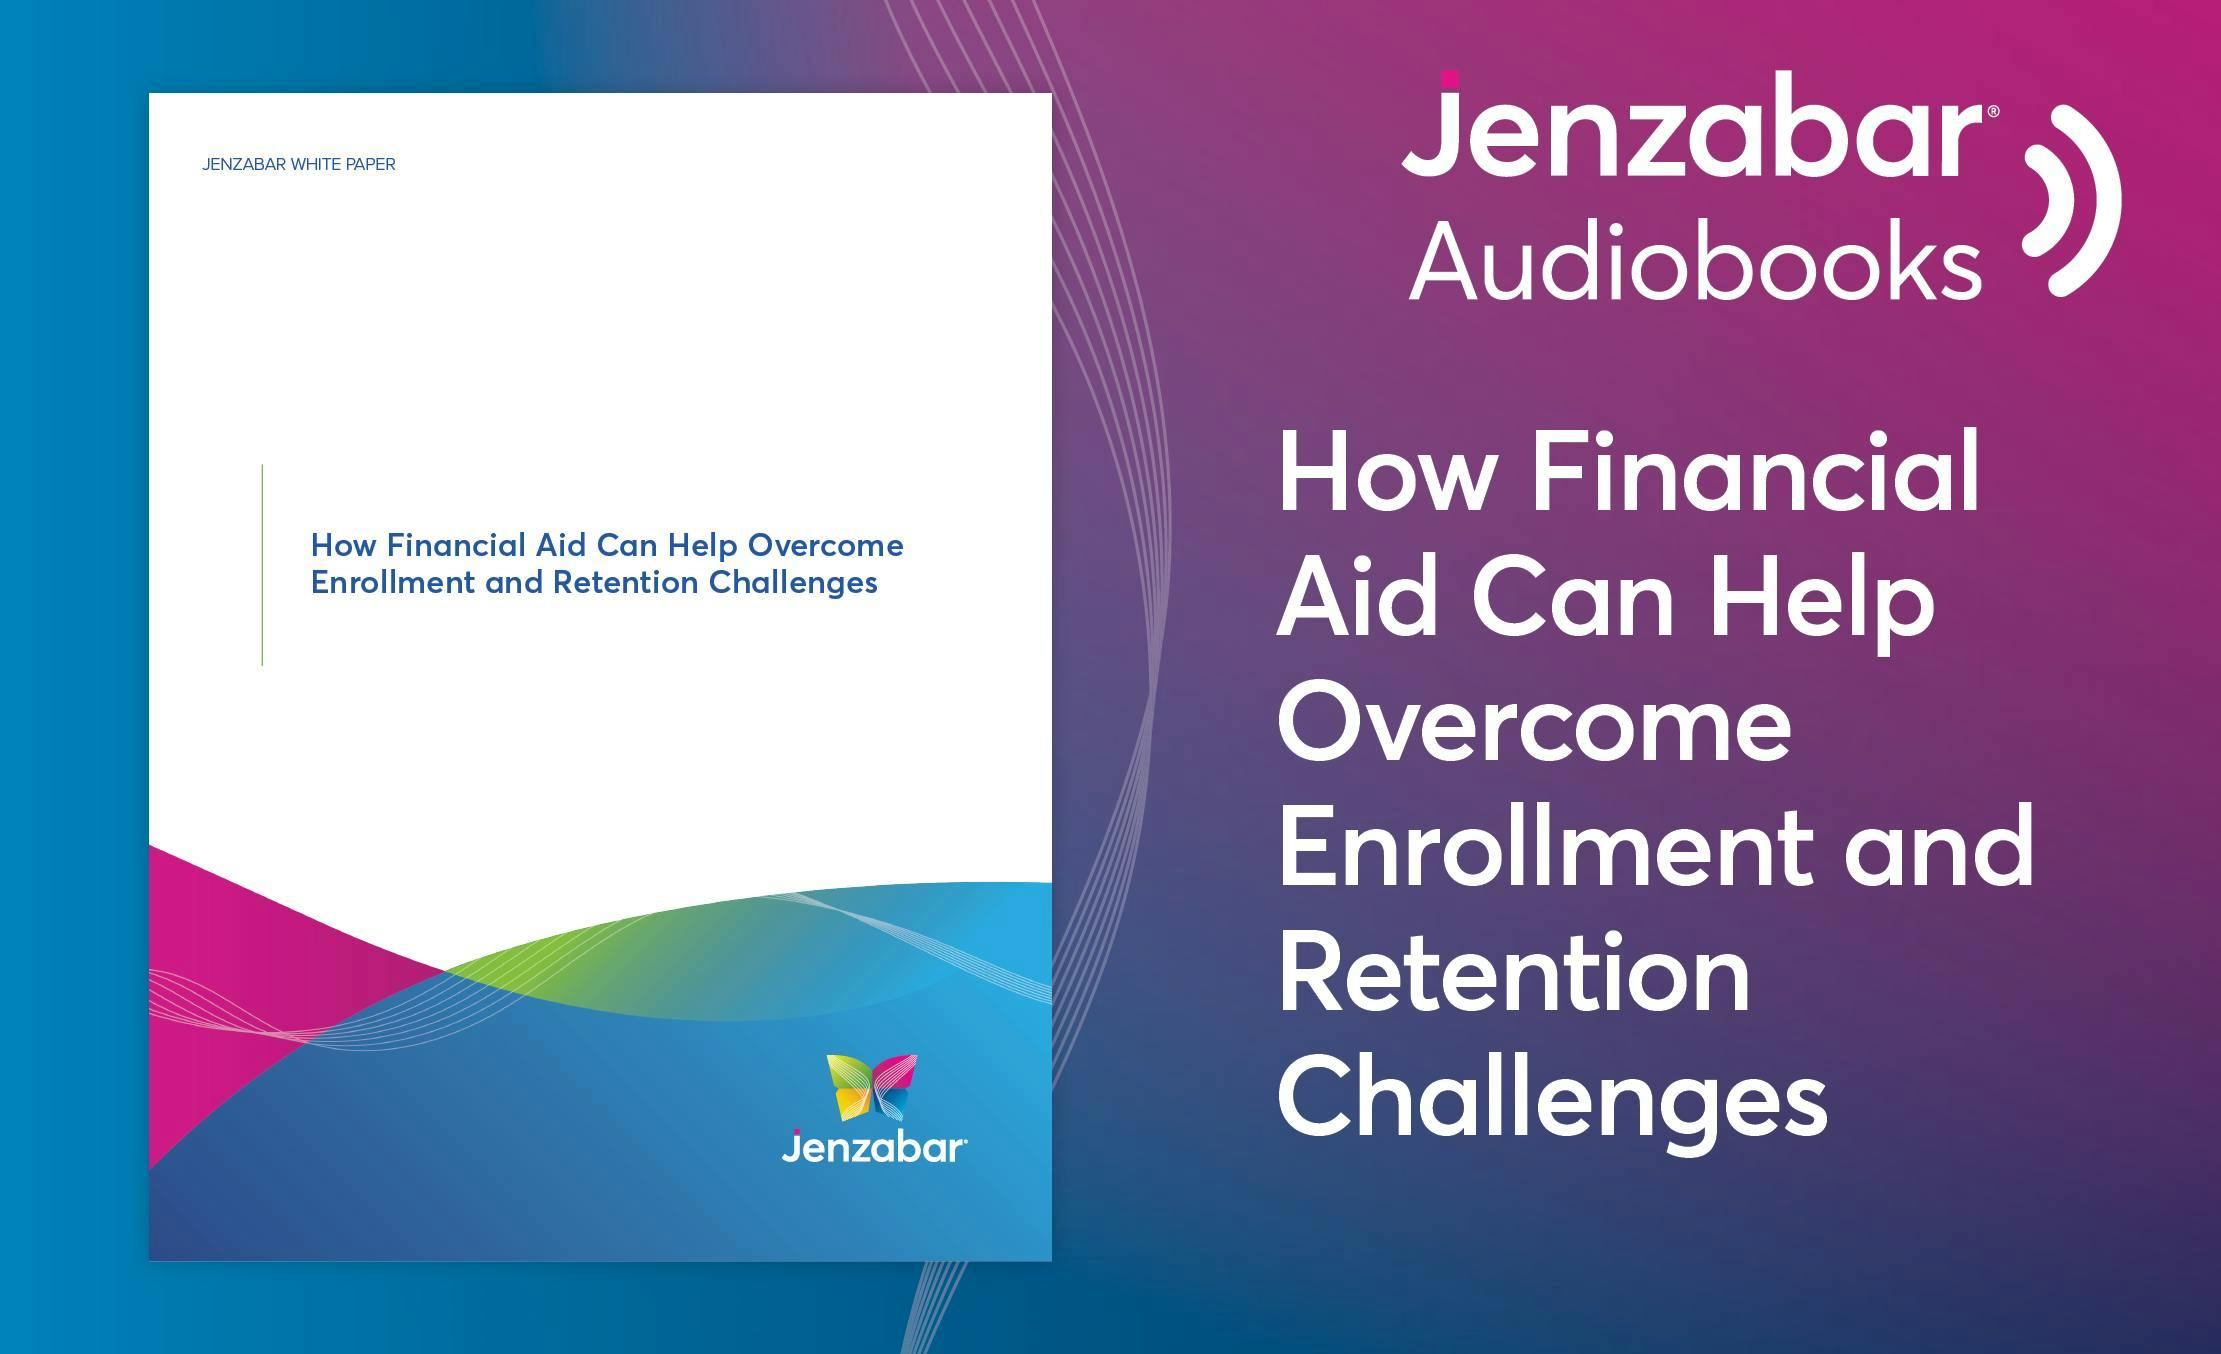 Audiobook: How Financial Aid Can Help Overcome Enrollment and Retention Challenges